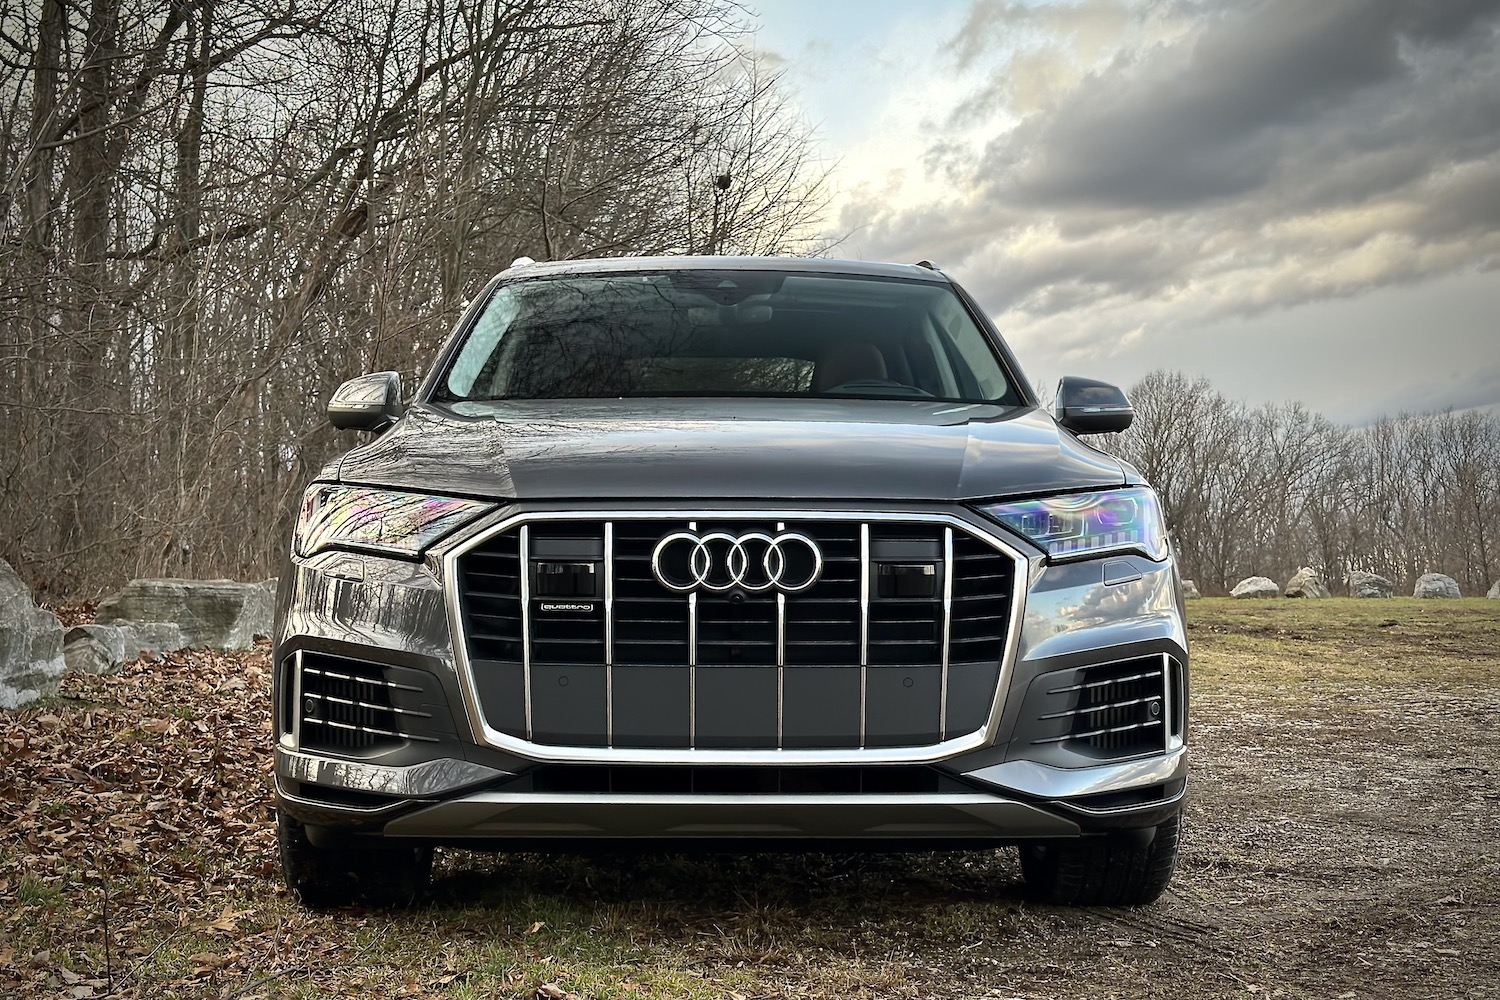 Close up of front end of the 2022 Audi Q7 Prestige parked in a grassy field with trees in the back.